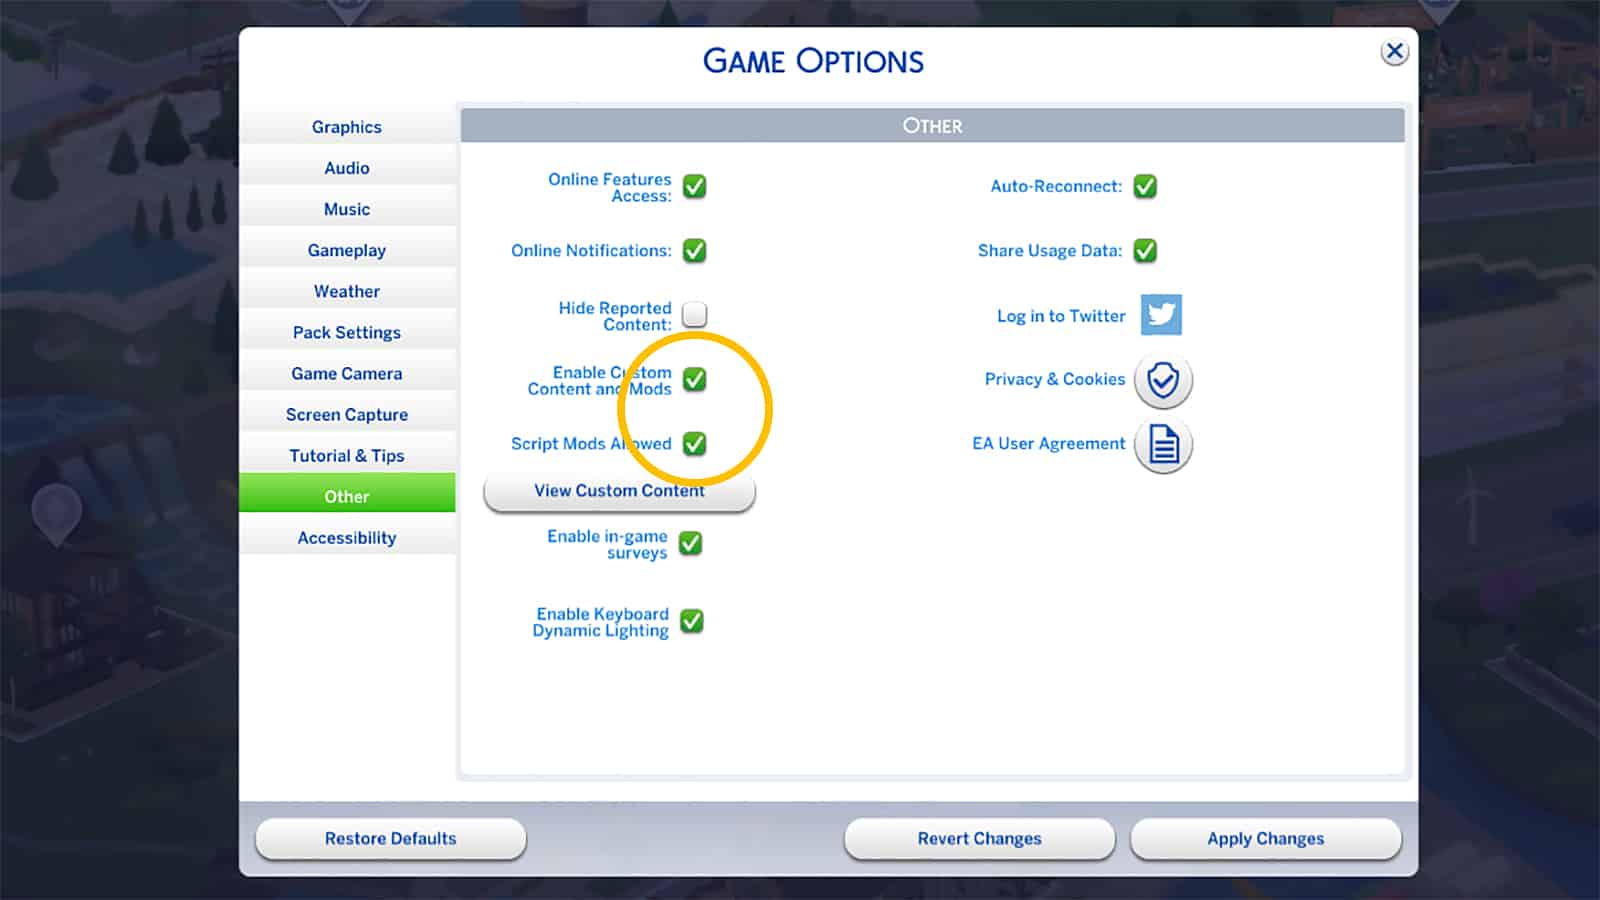 Sims 4 Downloads • Best Sims 4 Custom Content